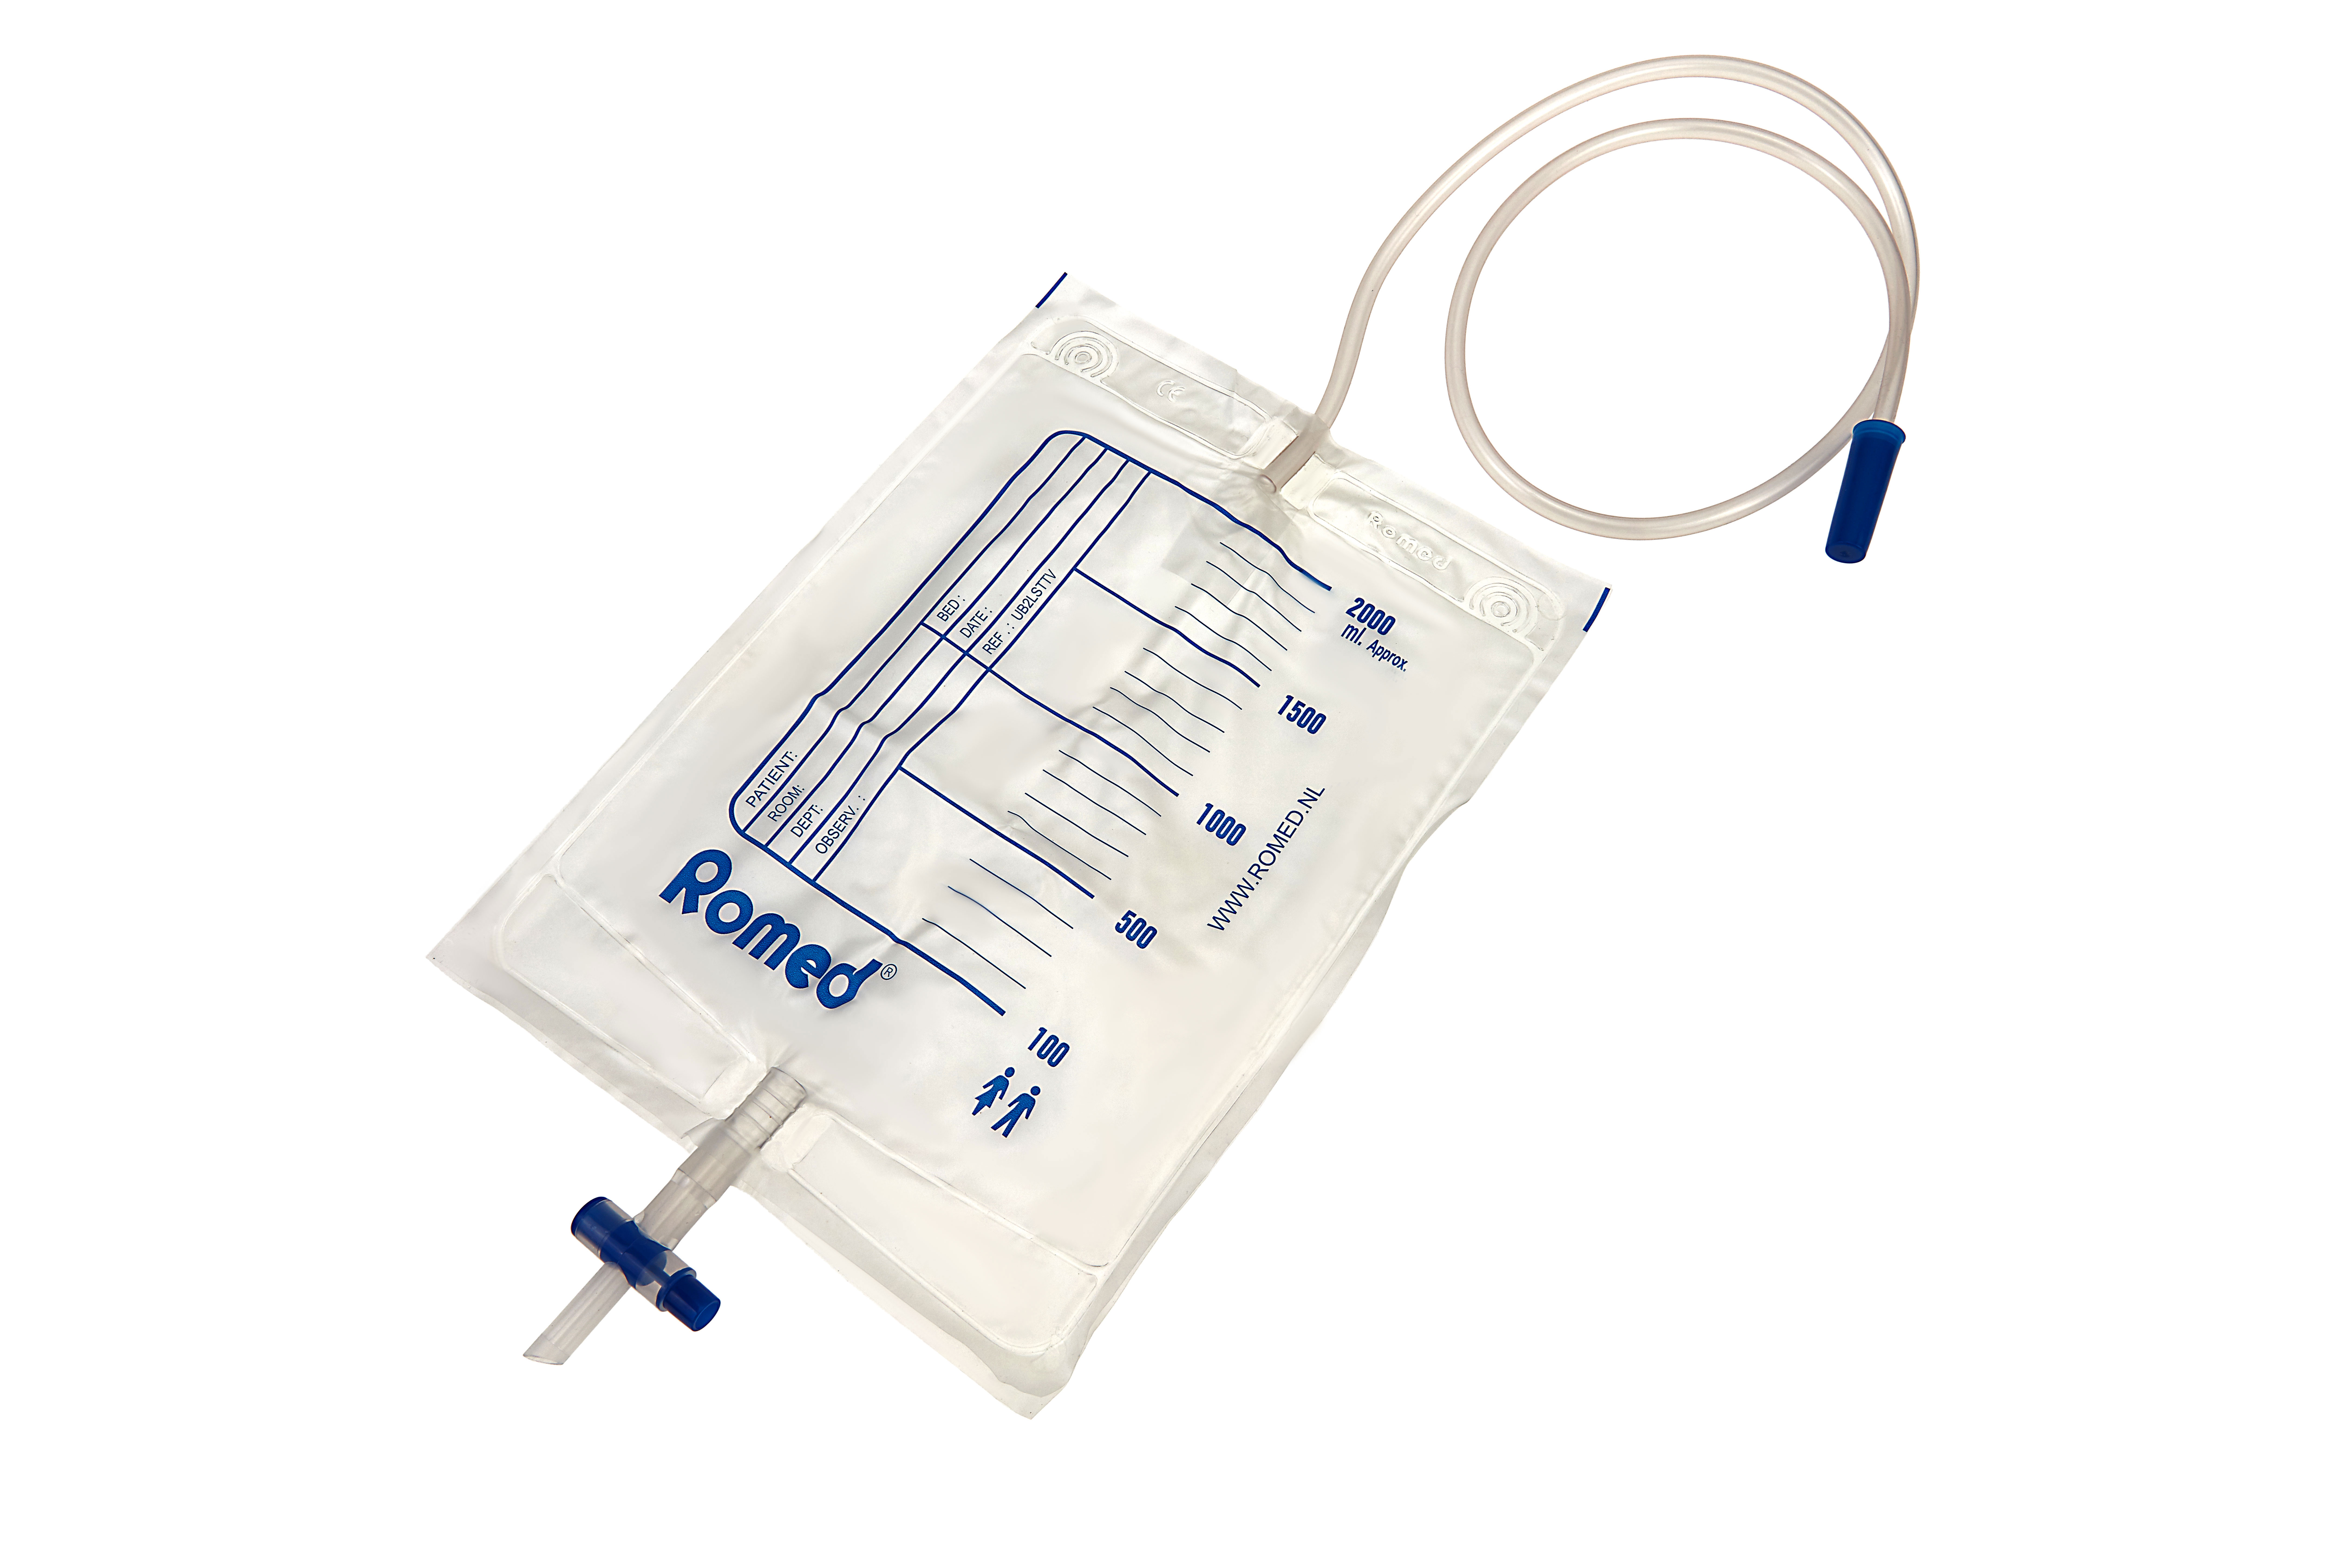 UB2LSTTV Romed urine bags 2 litres, with non return valve and t-valve, 90cm tube, sterile per piece in a polybag, 10 pieces in a bigger polybag, 250 pcs in a carton.